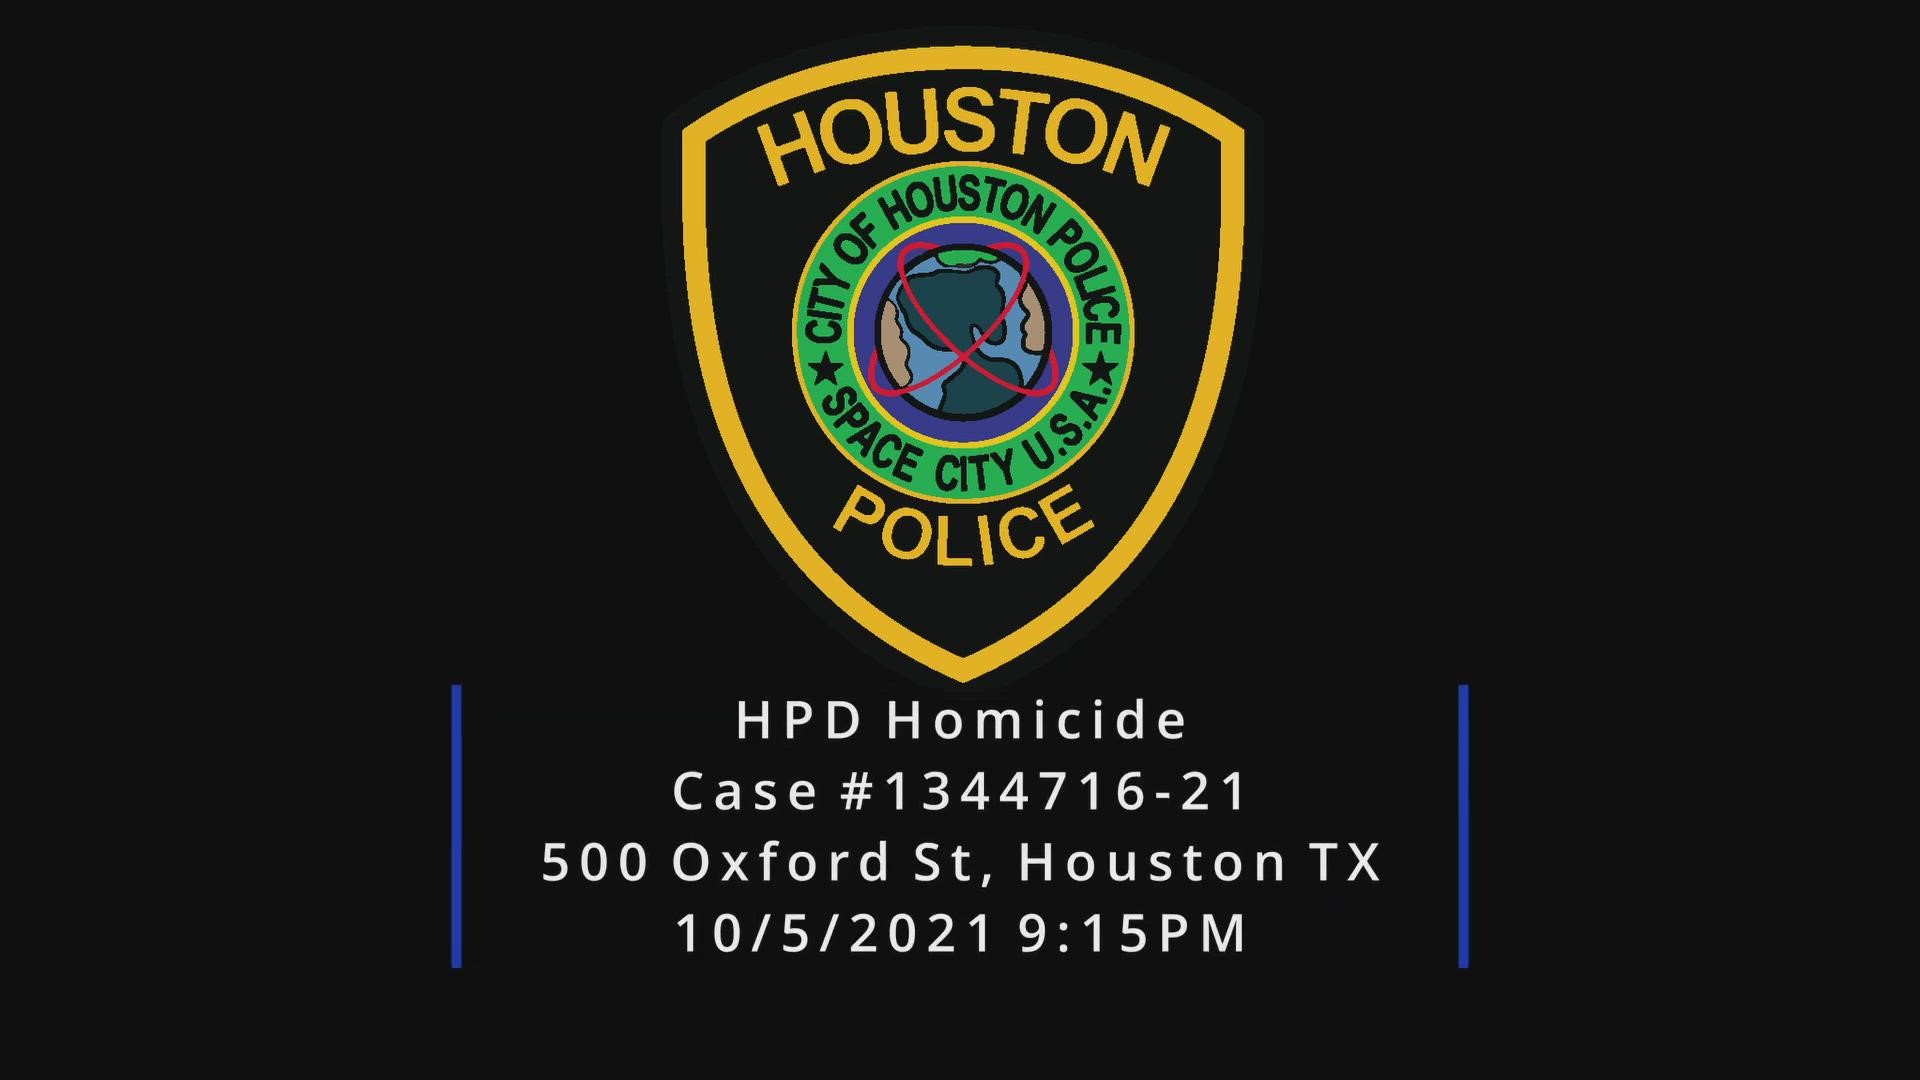 Houston police have released surveillance video of a vehicle they believe may be connected to a deadly shooting that happened Tuesday in the Greater Heights area.